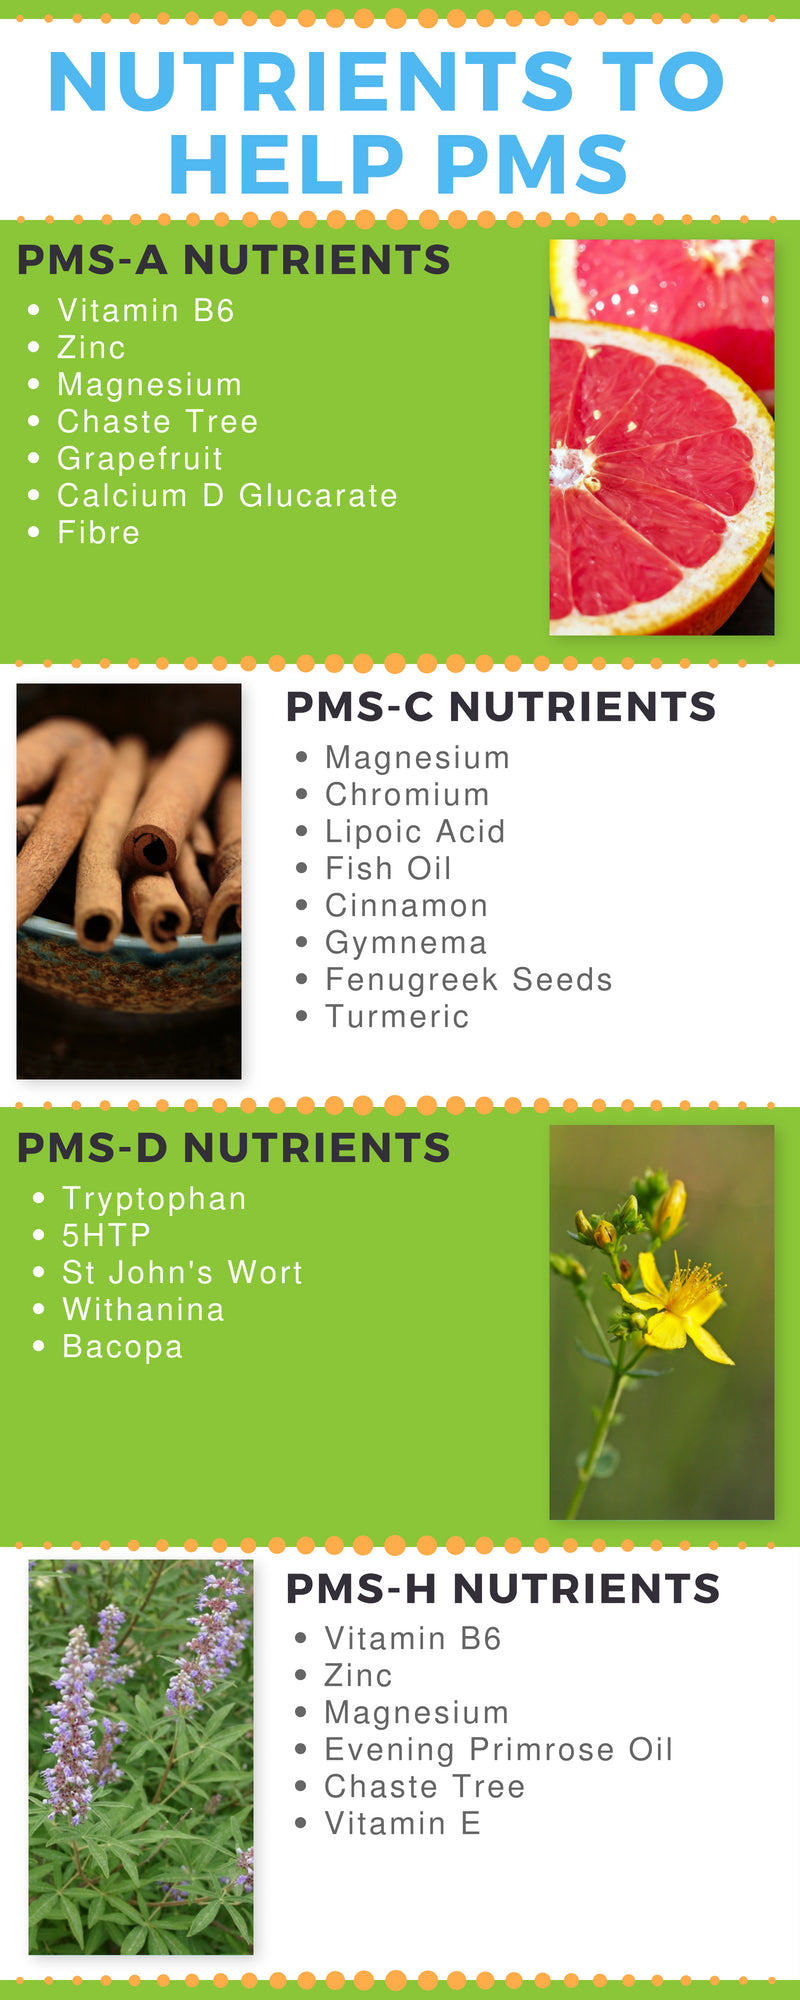 Nutrients to Help PMS